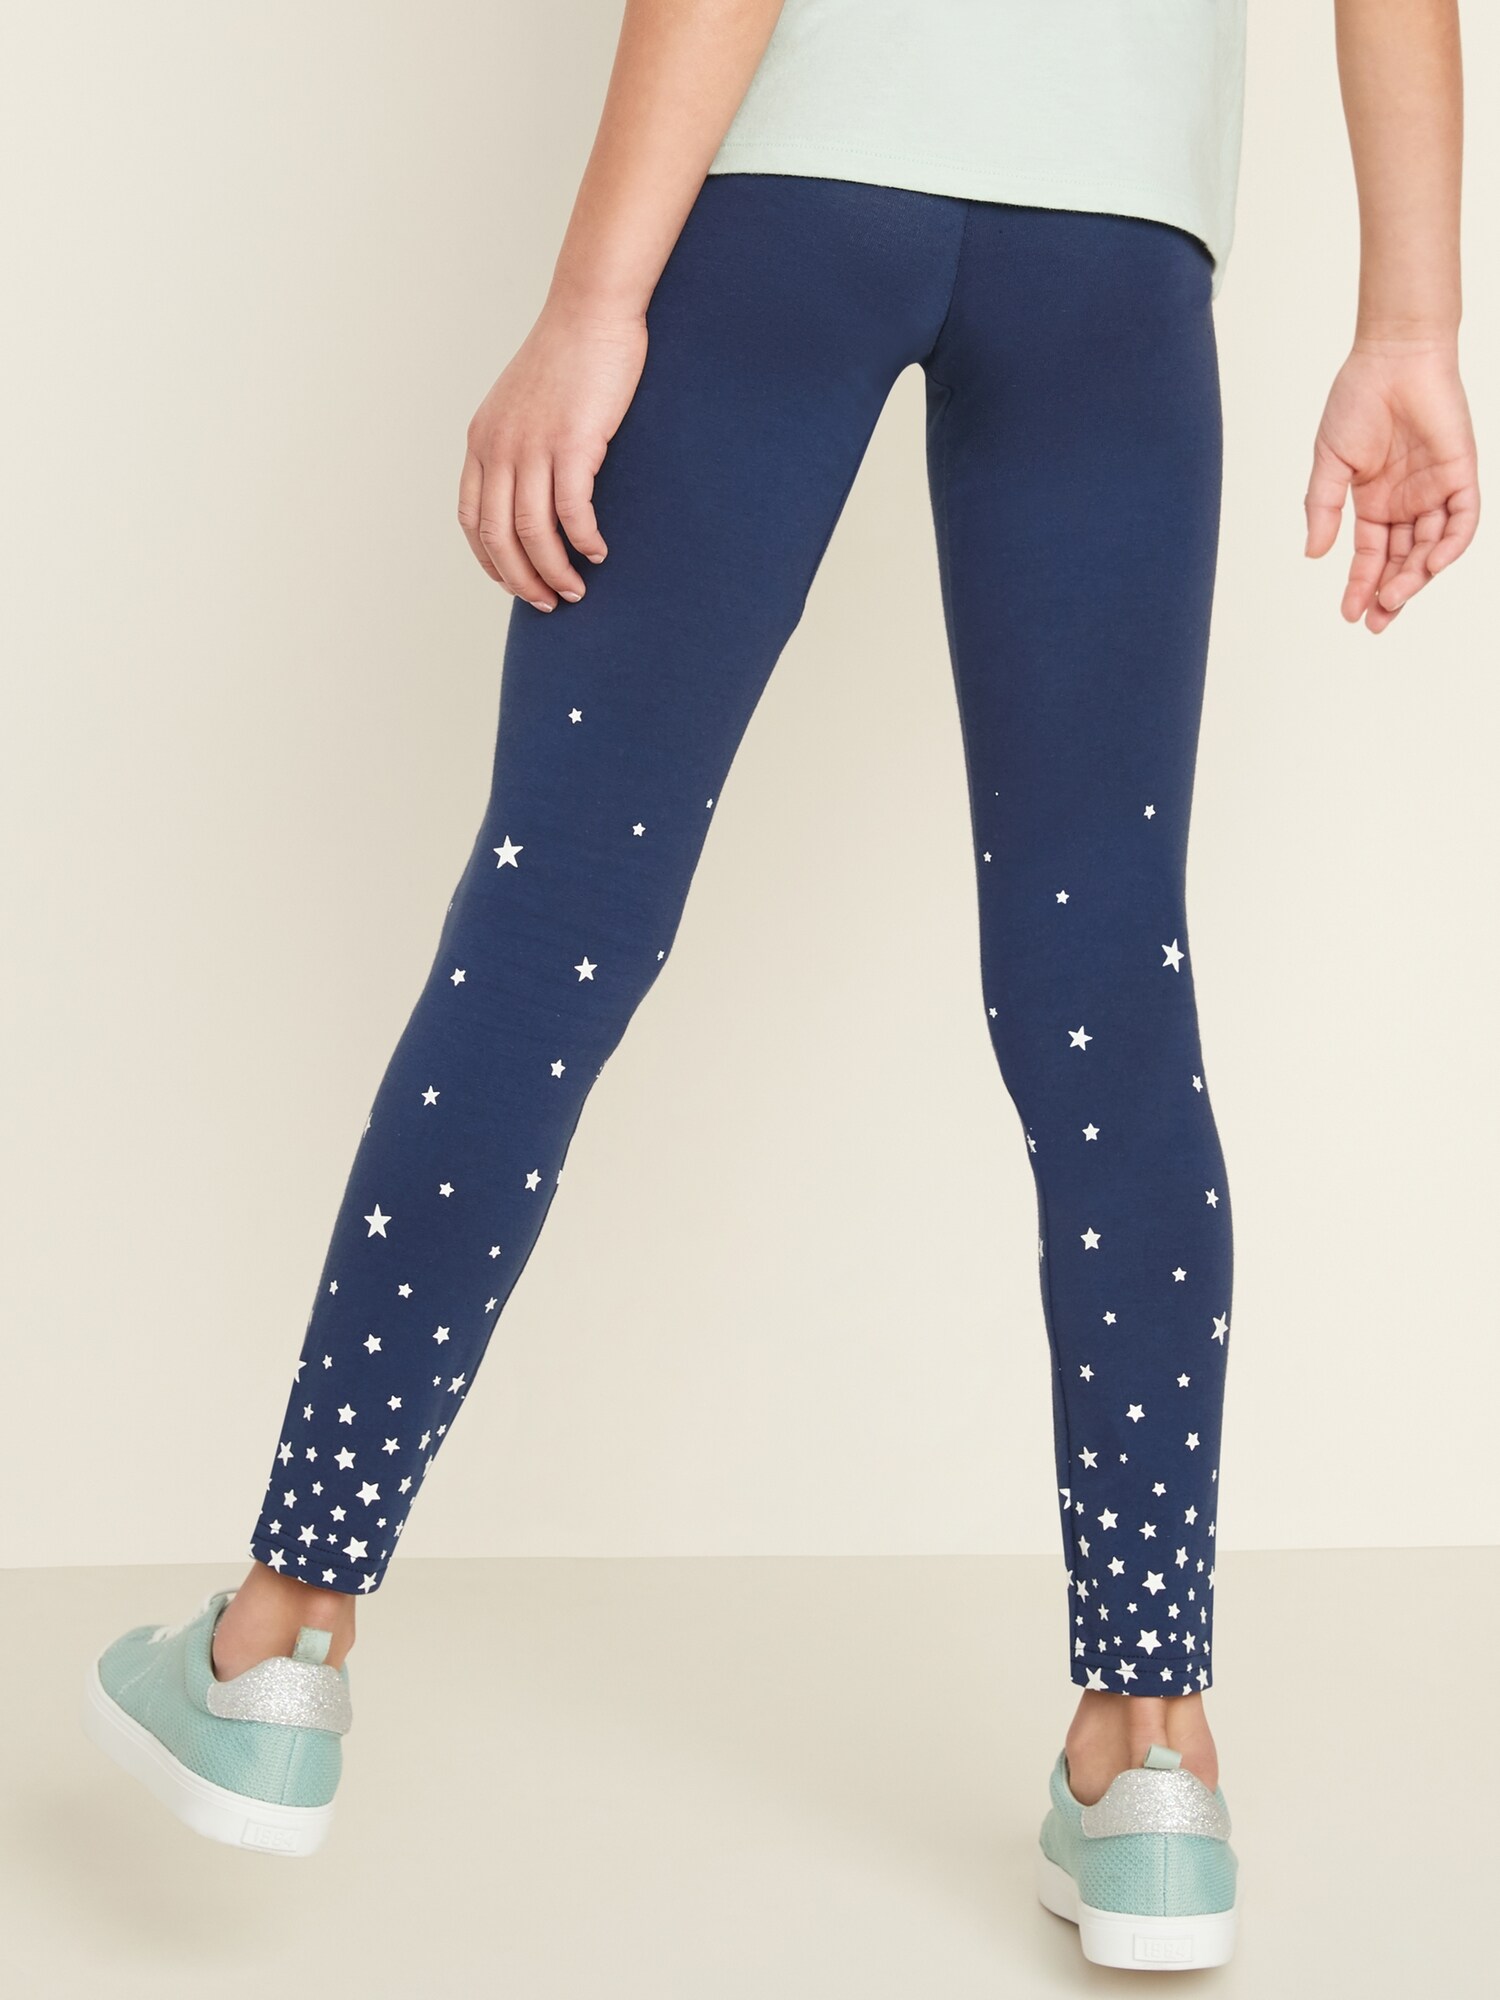 Old Navy Polka Dots Blue Leggings Size L (Tall) - 46% off